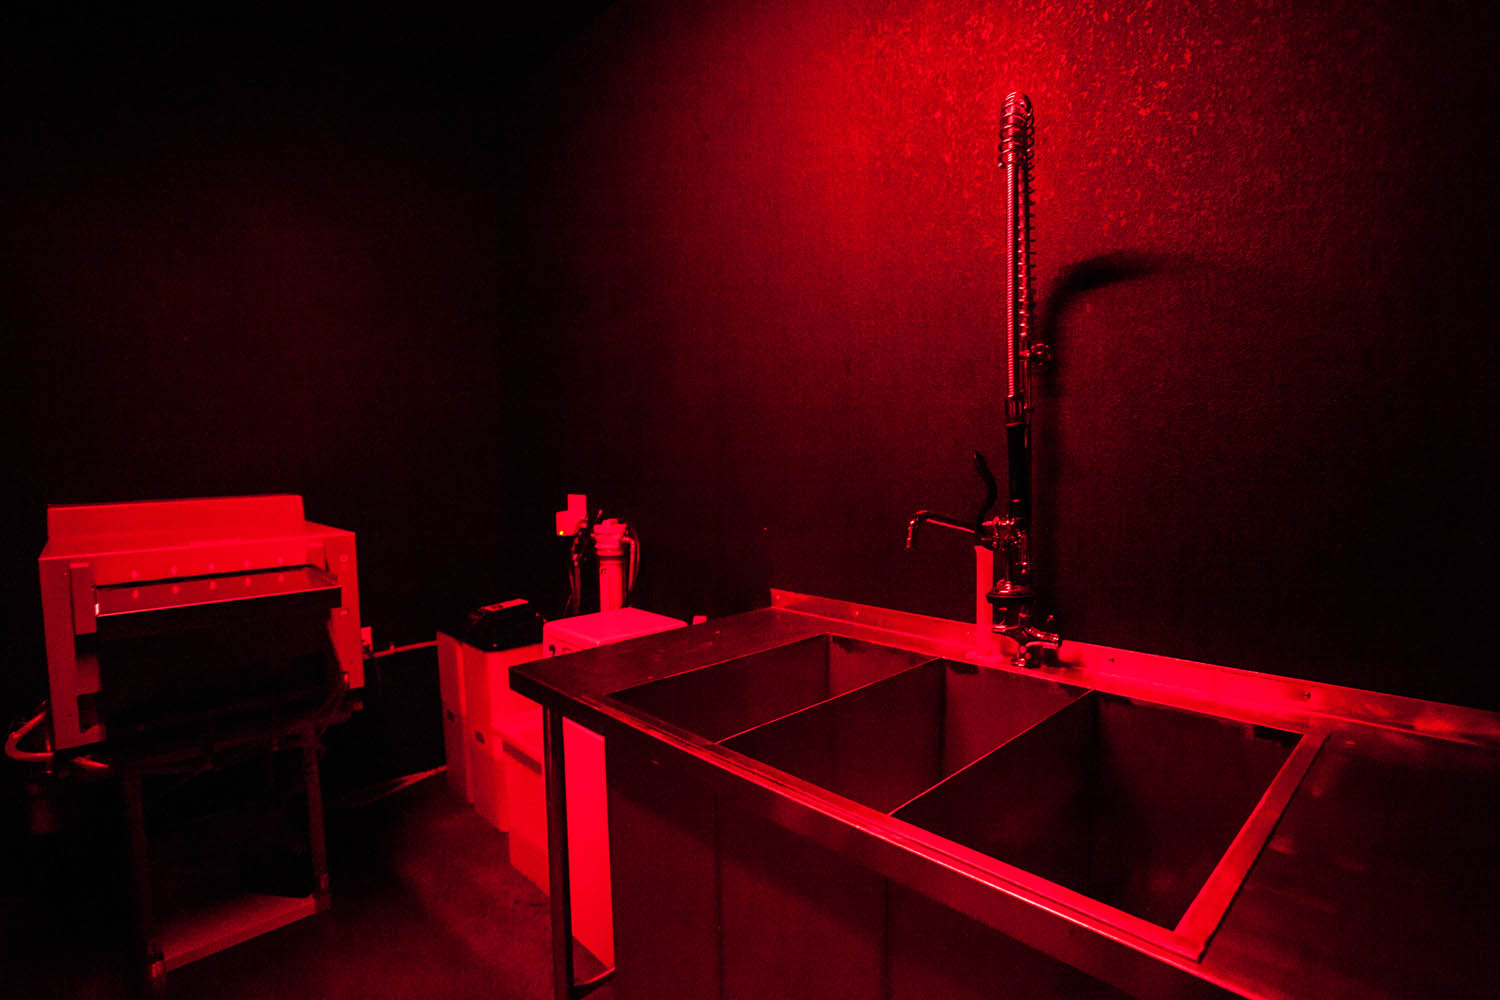 glowing red room for testing